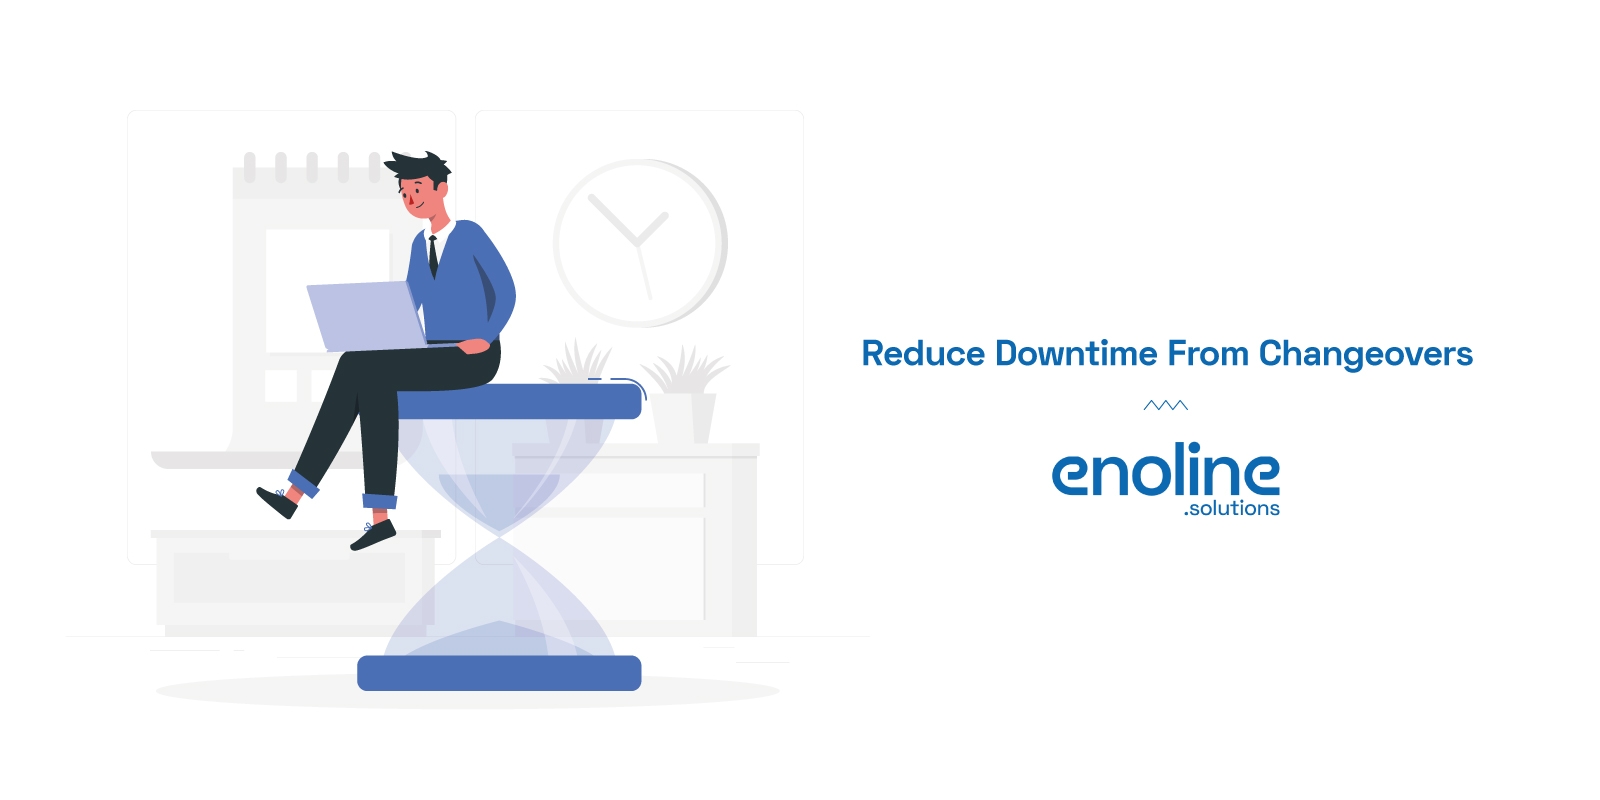 Reduce downtime from changeovers enoline